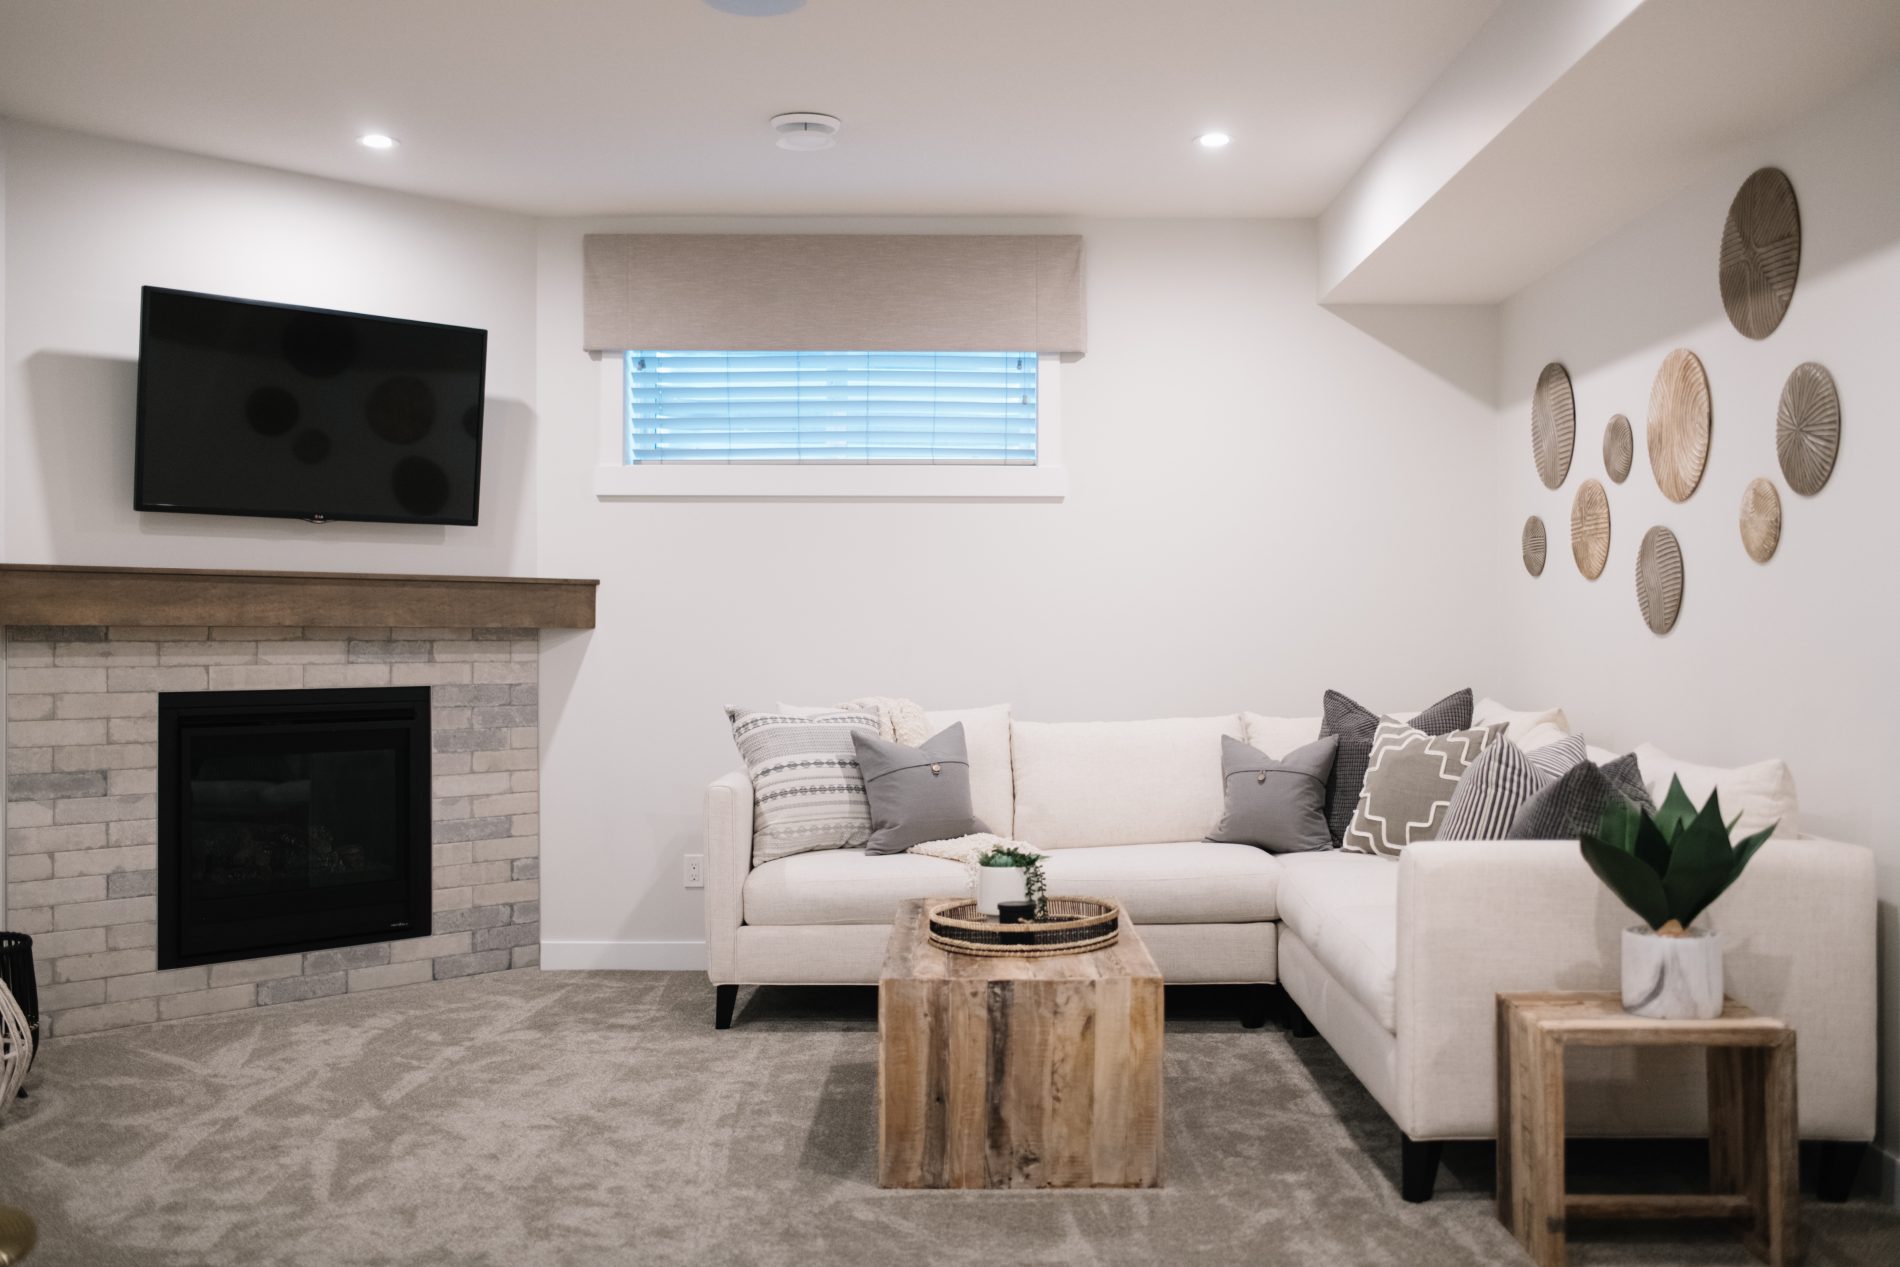 Bright and airy family room in basement with corner fireplace and comfy white sectional across from it